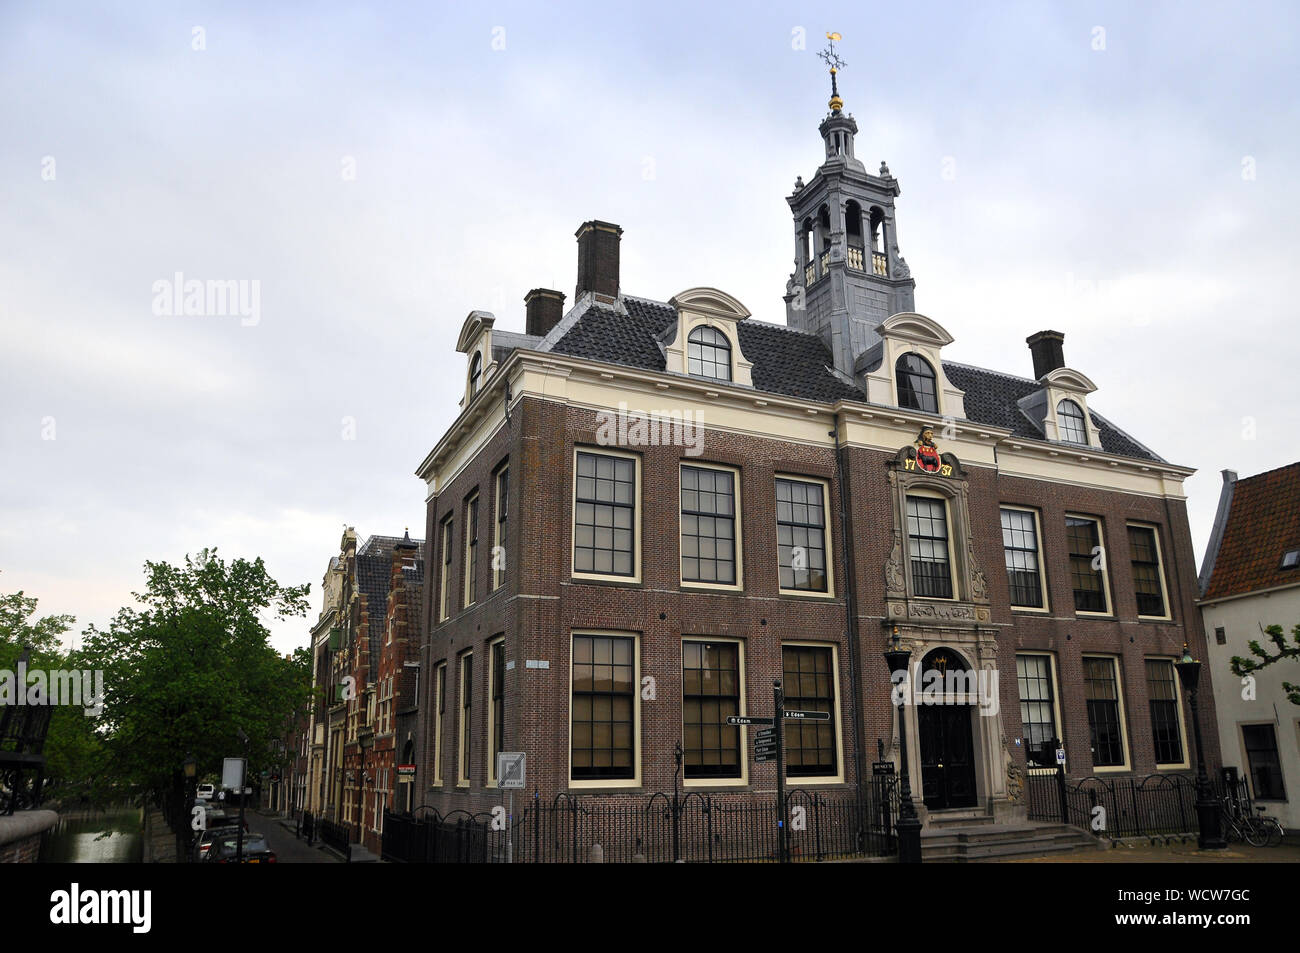 Town hall, downtown, Edam, Netherlands, Europe Stock Photo